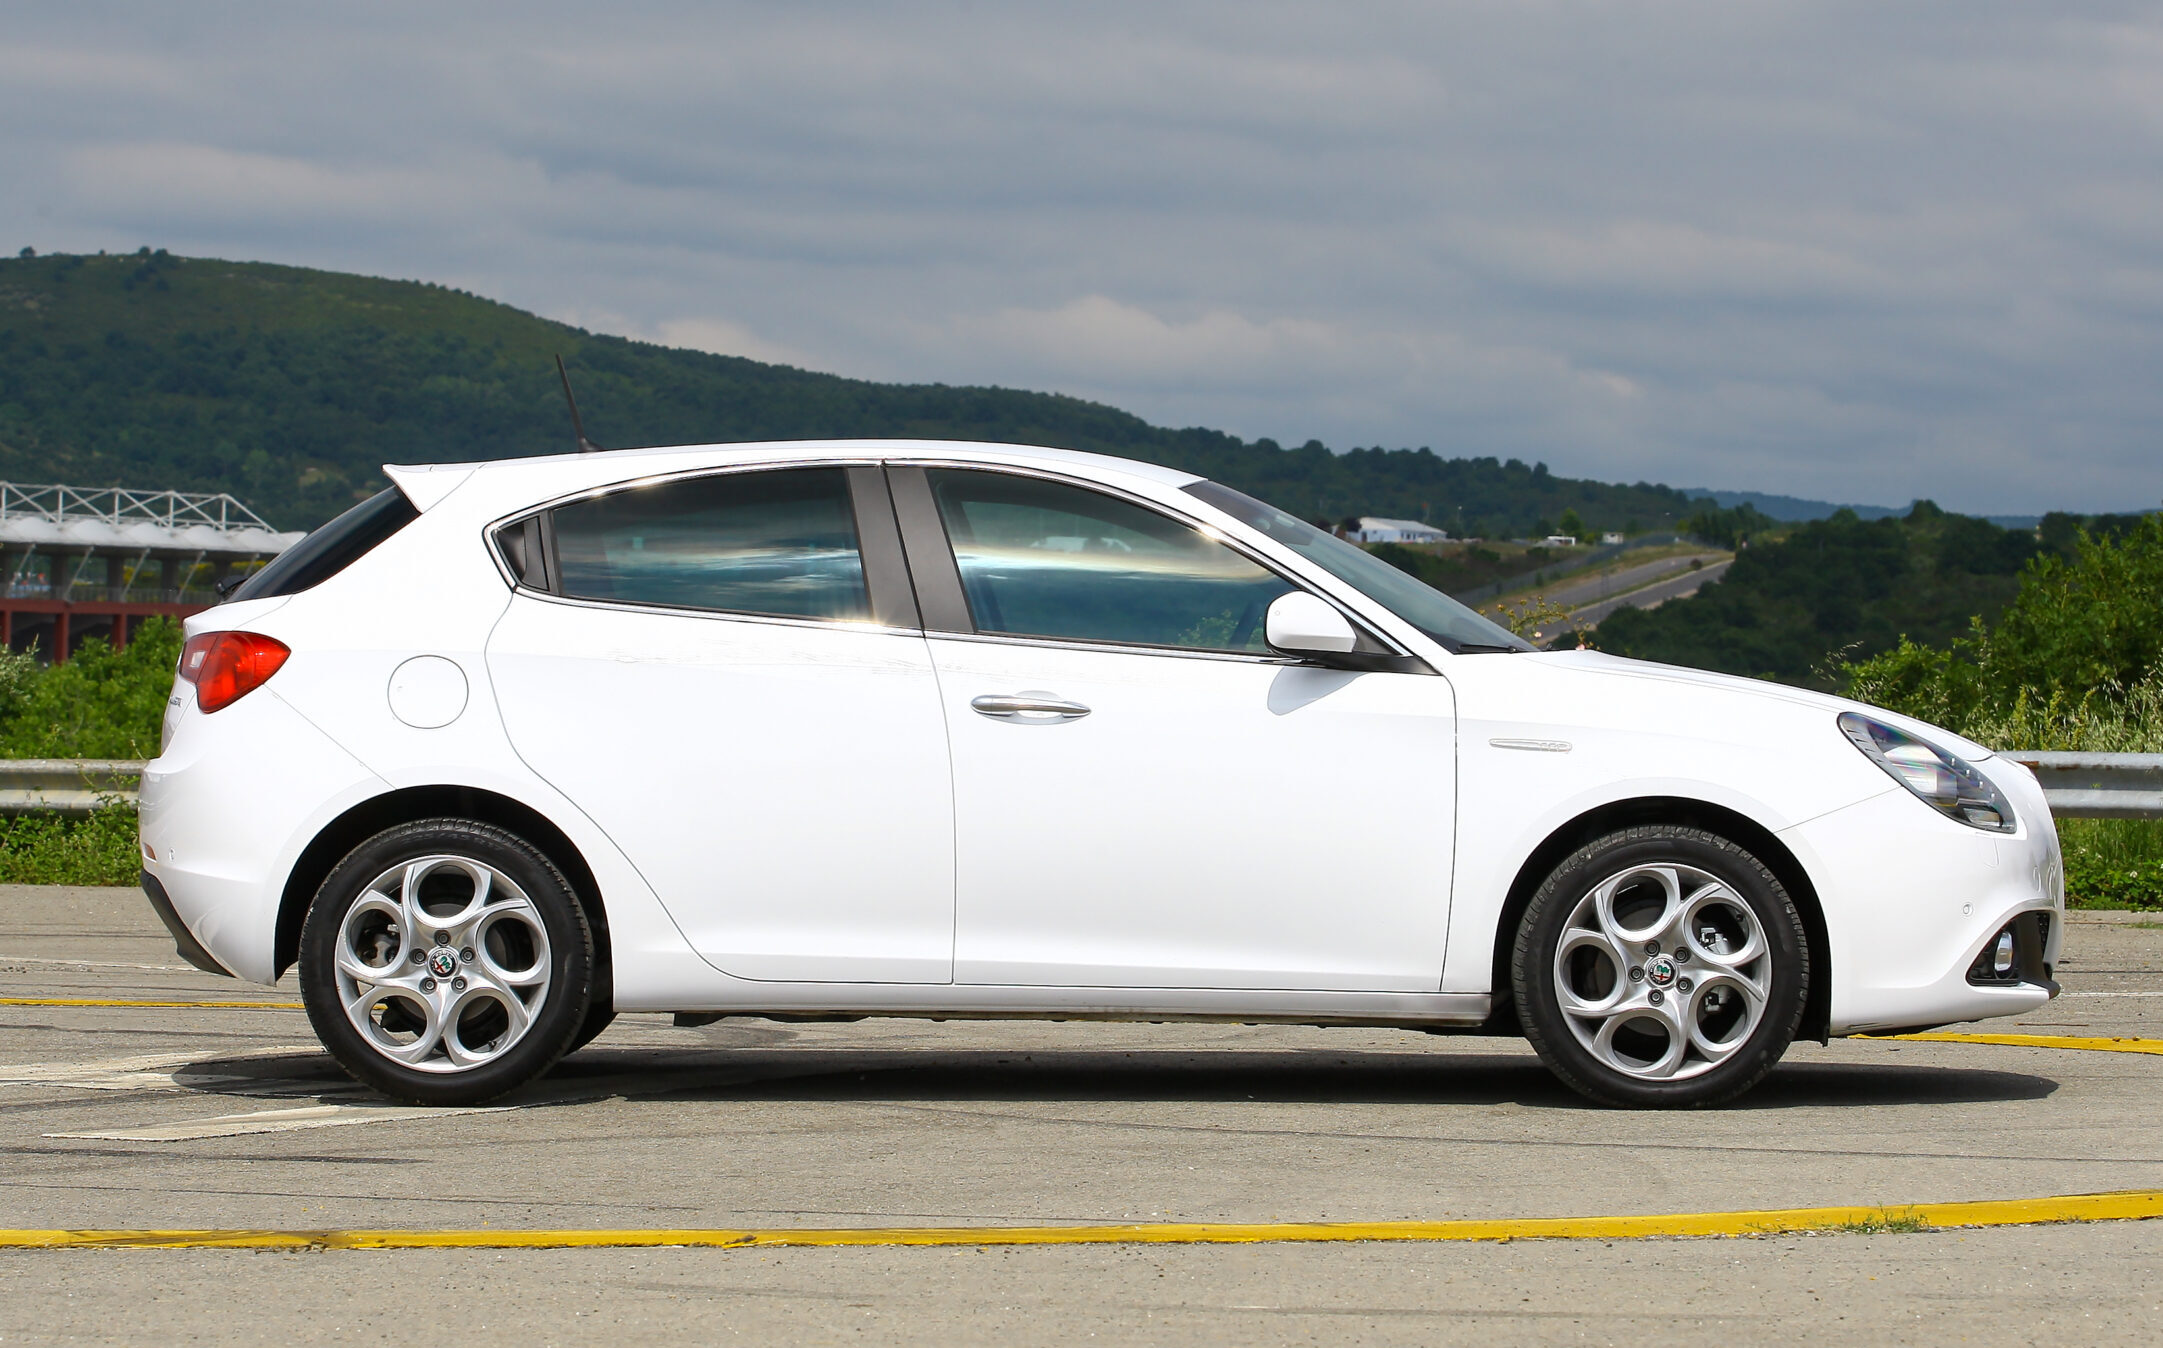 Alfa Romeo Giulietta 2013 Cars Review: Price List, Full Specifications,  Images, Videos